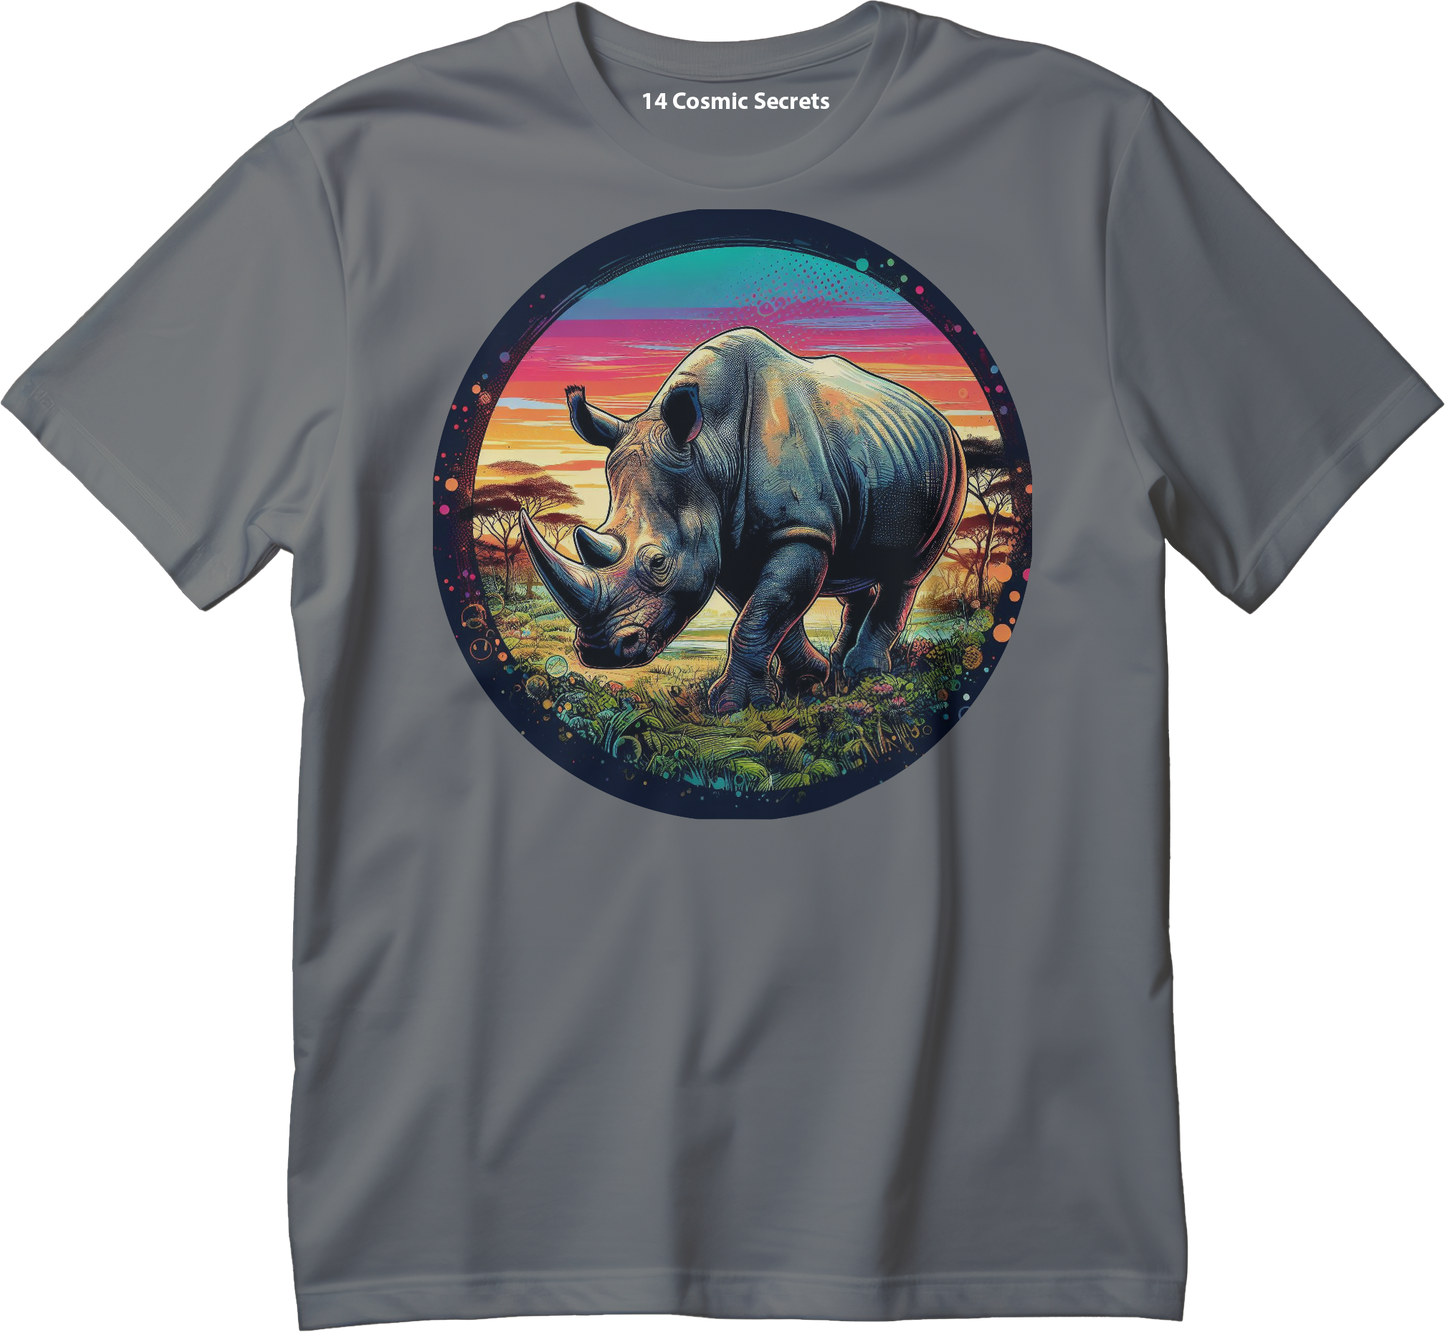 Rhino on a Stroll Graphic Printed T-Shirt  Cotton T-Shirt Magnificence of India T-Shirt